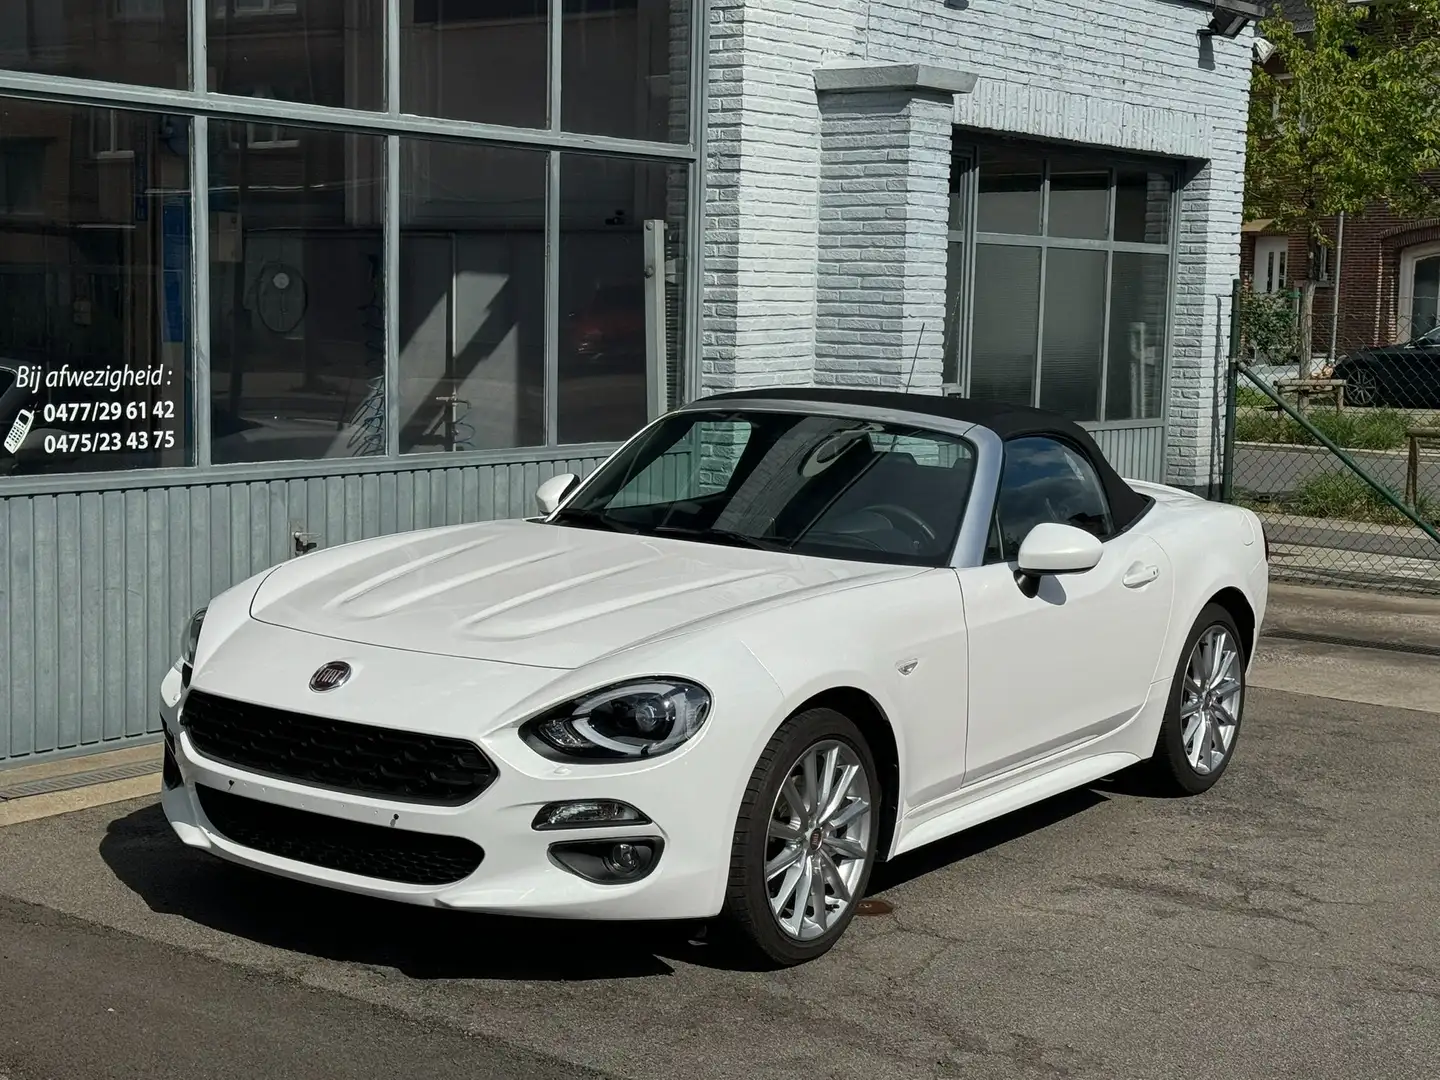 Fiat 124 Spider 1.4 MultiAir Lusso Cuir Gps Caméra 15.000kms✅ Wit - 1